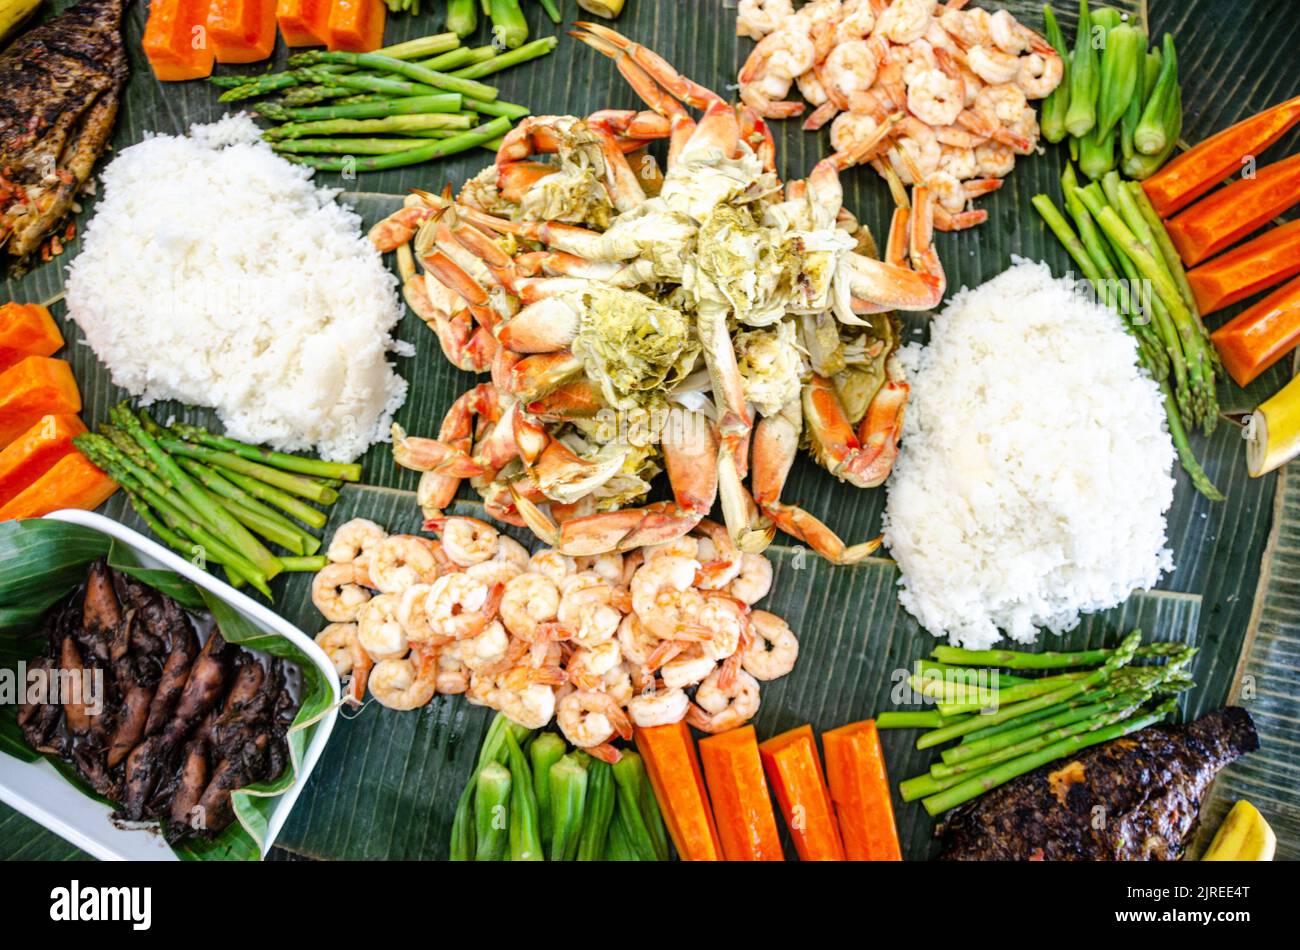 Boodle fight is a Filipino social meal or buffet eaten using hands seen here including crab, prawns, okra, asparagus and boiled rice. Stock Photo